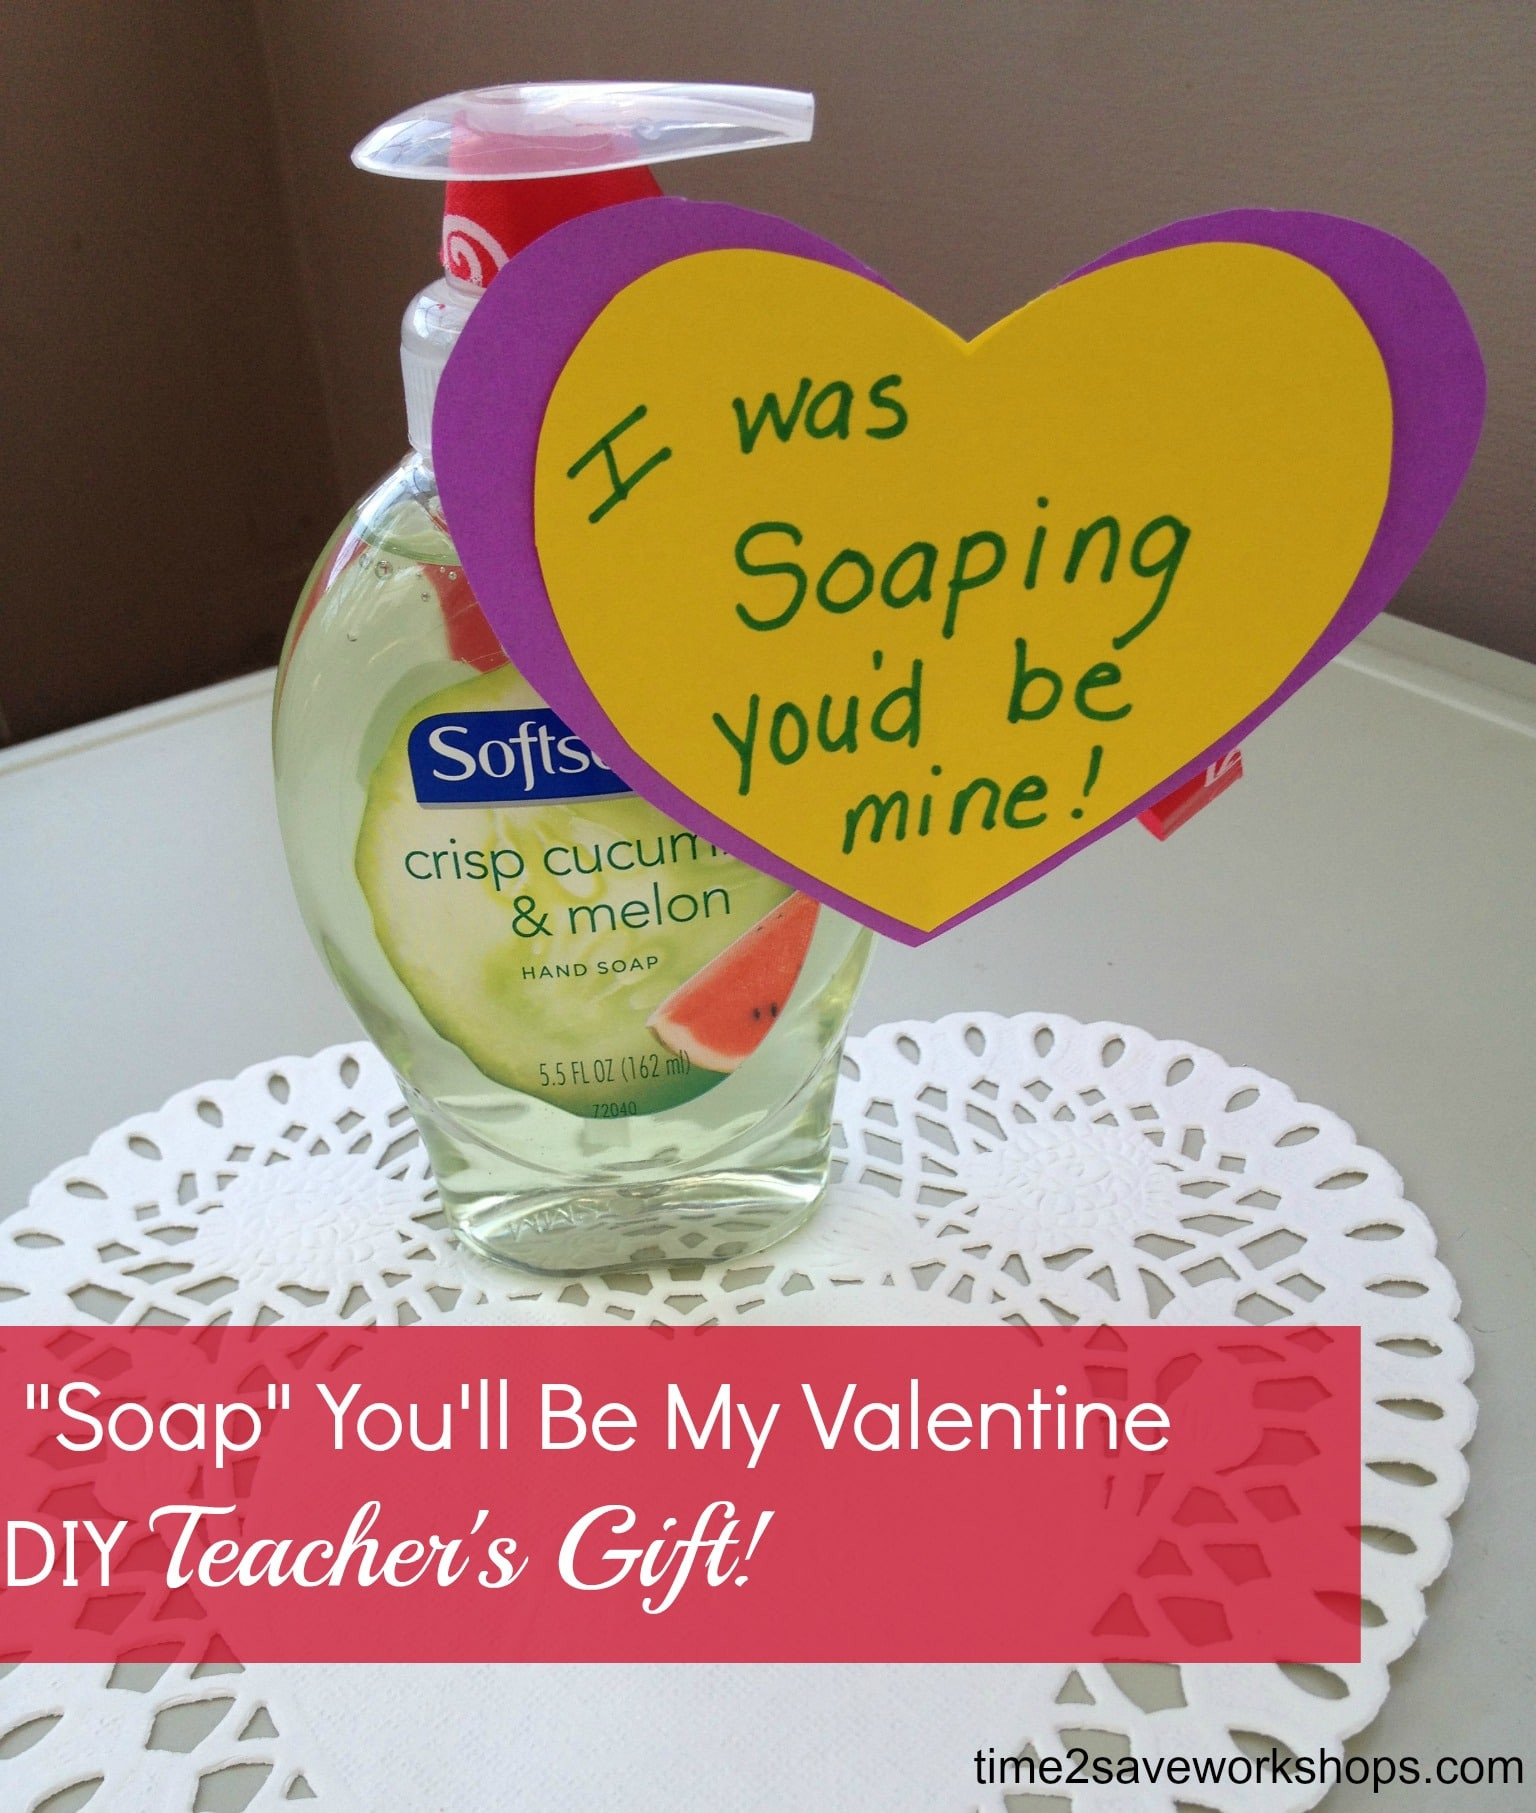 Homemade Valentine Gift Ideas
 Homemade Valentine Gifts "Soap" You ll Be My Valentine